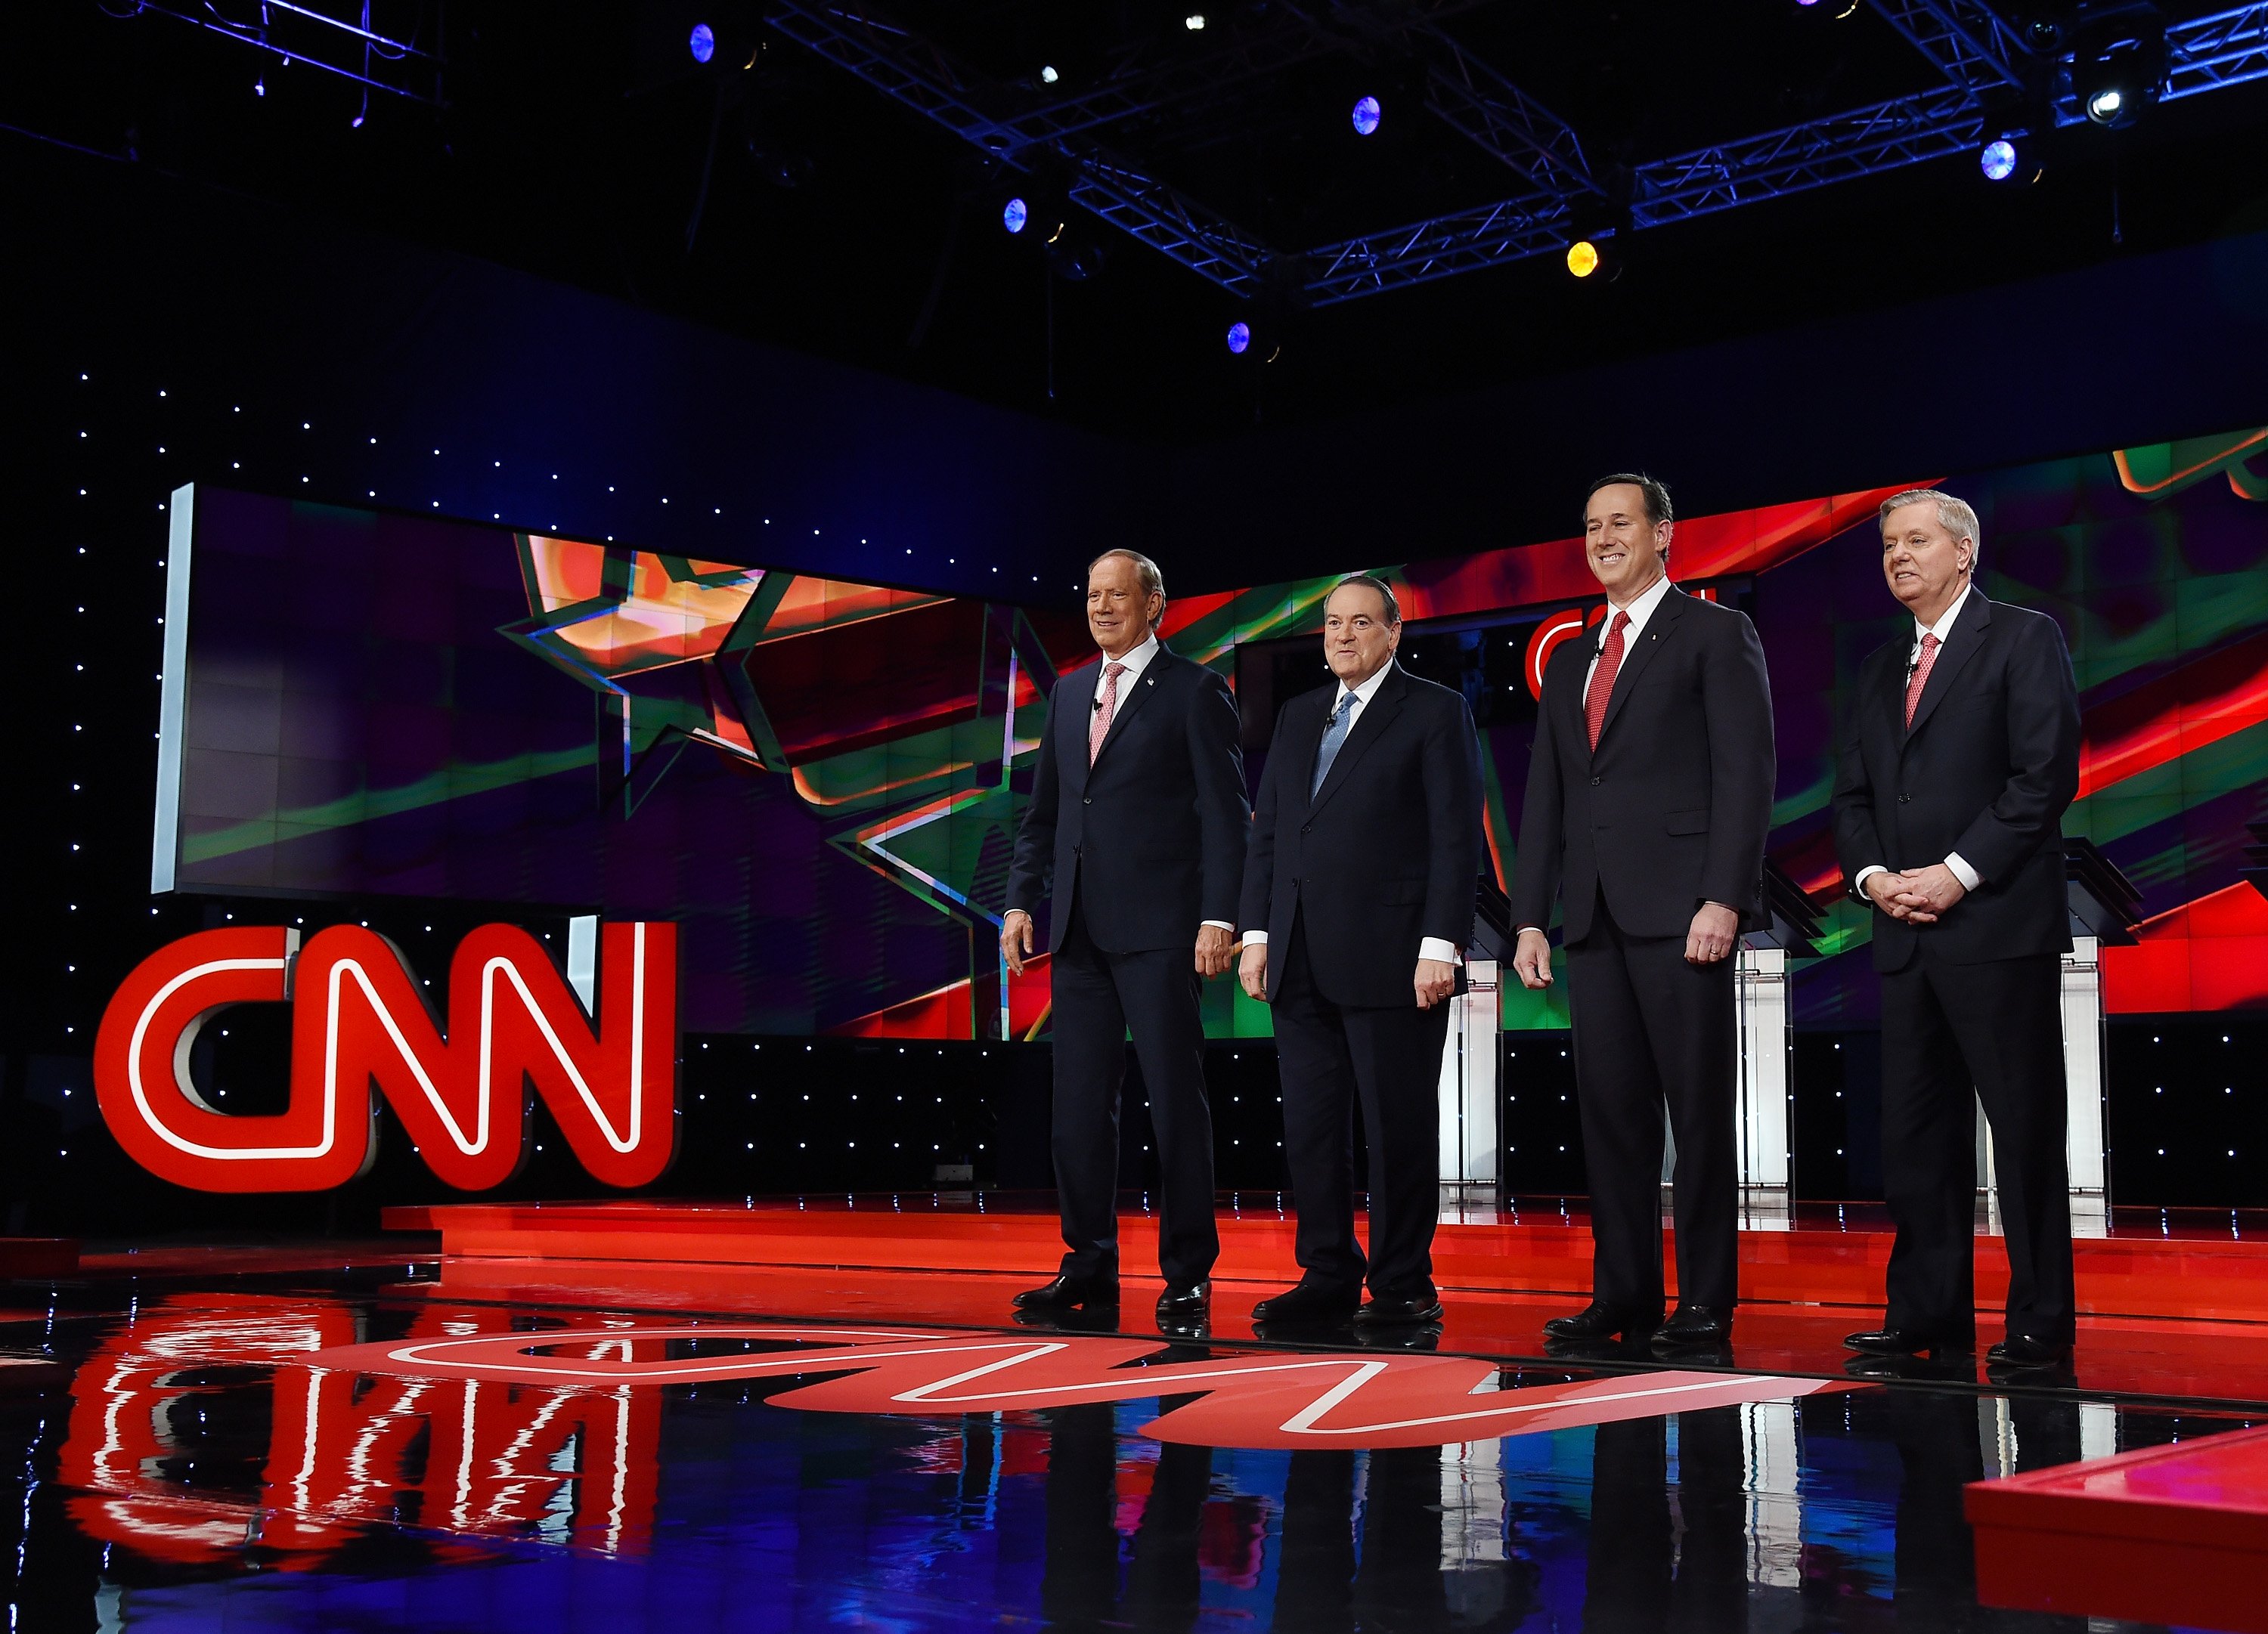 George Pataki, Mike Huckabee, Rick Santorum and Sen. Lindsay Graham are introduced during the CNN presidential debate at The Venetian in Las Vegas, Nevada on Dec. 15, 2015. (Ethan Miller—Getty Images)